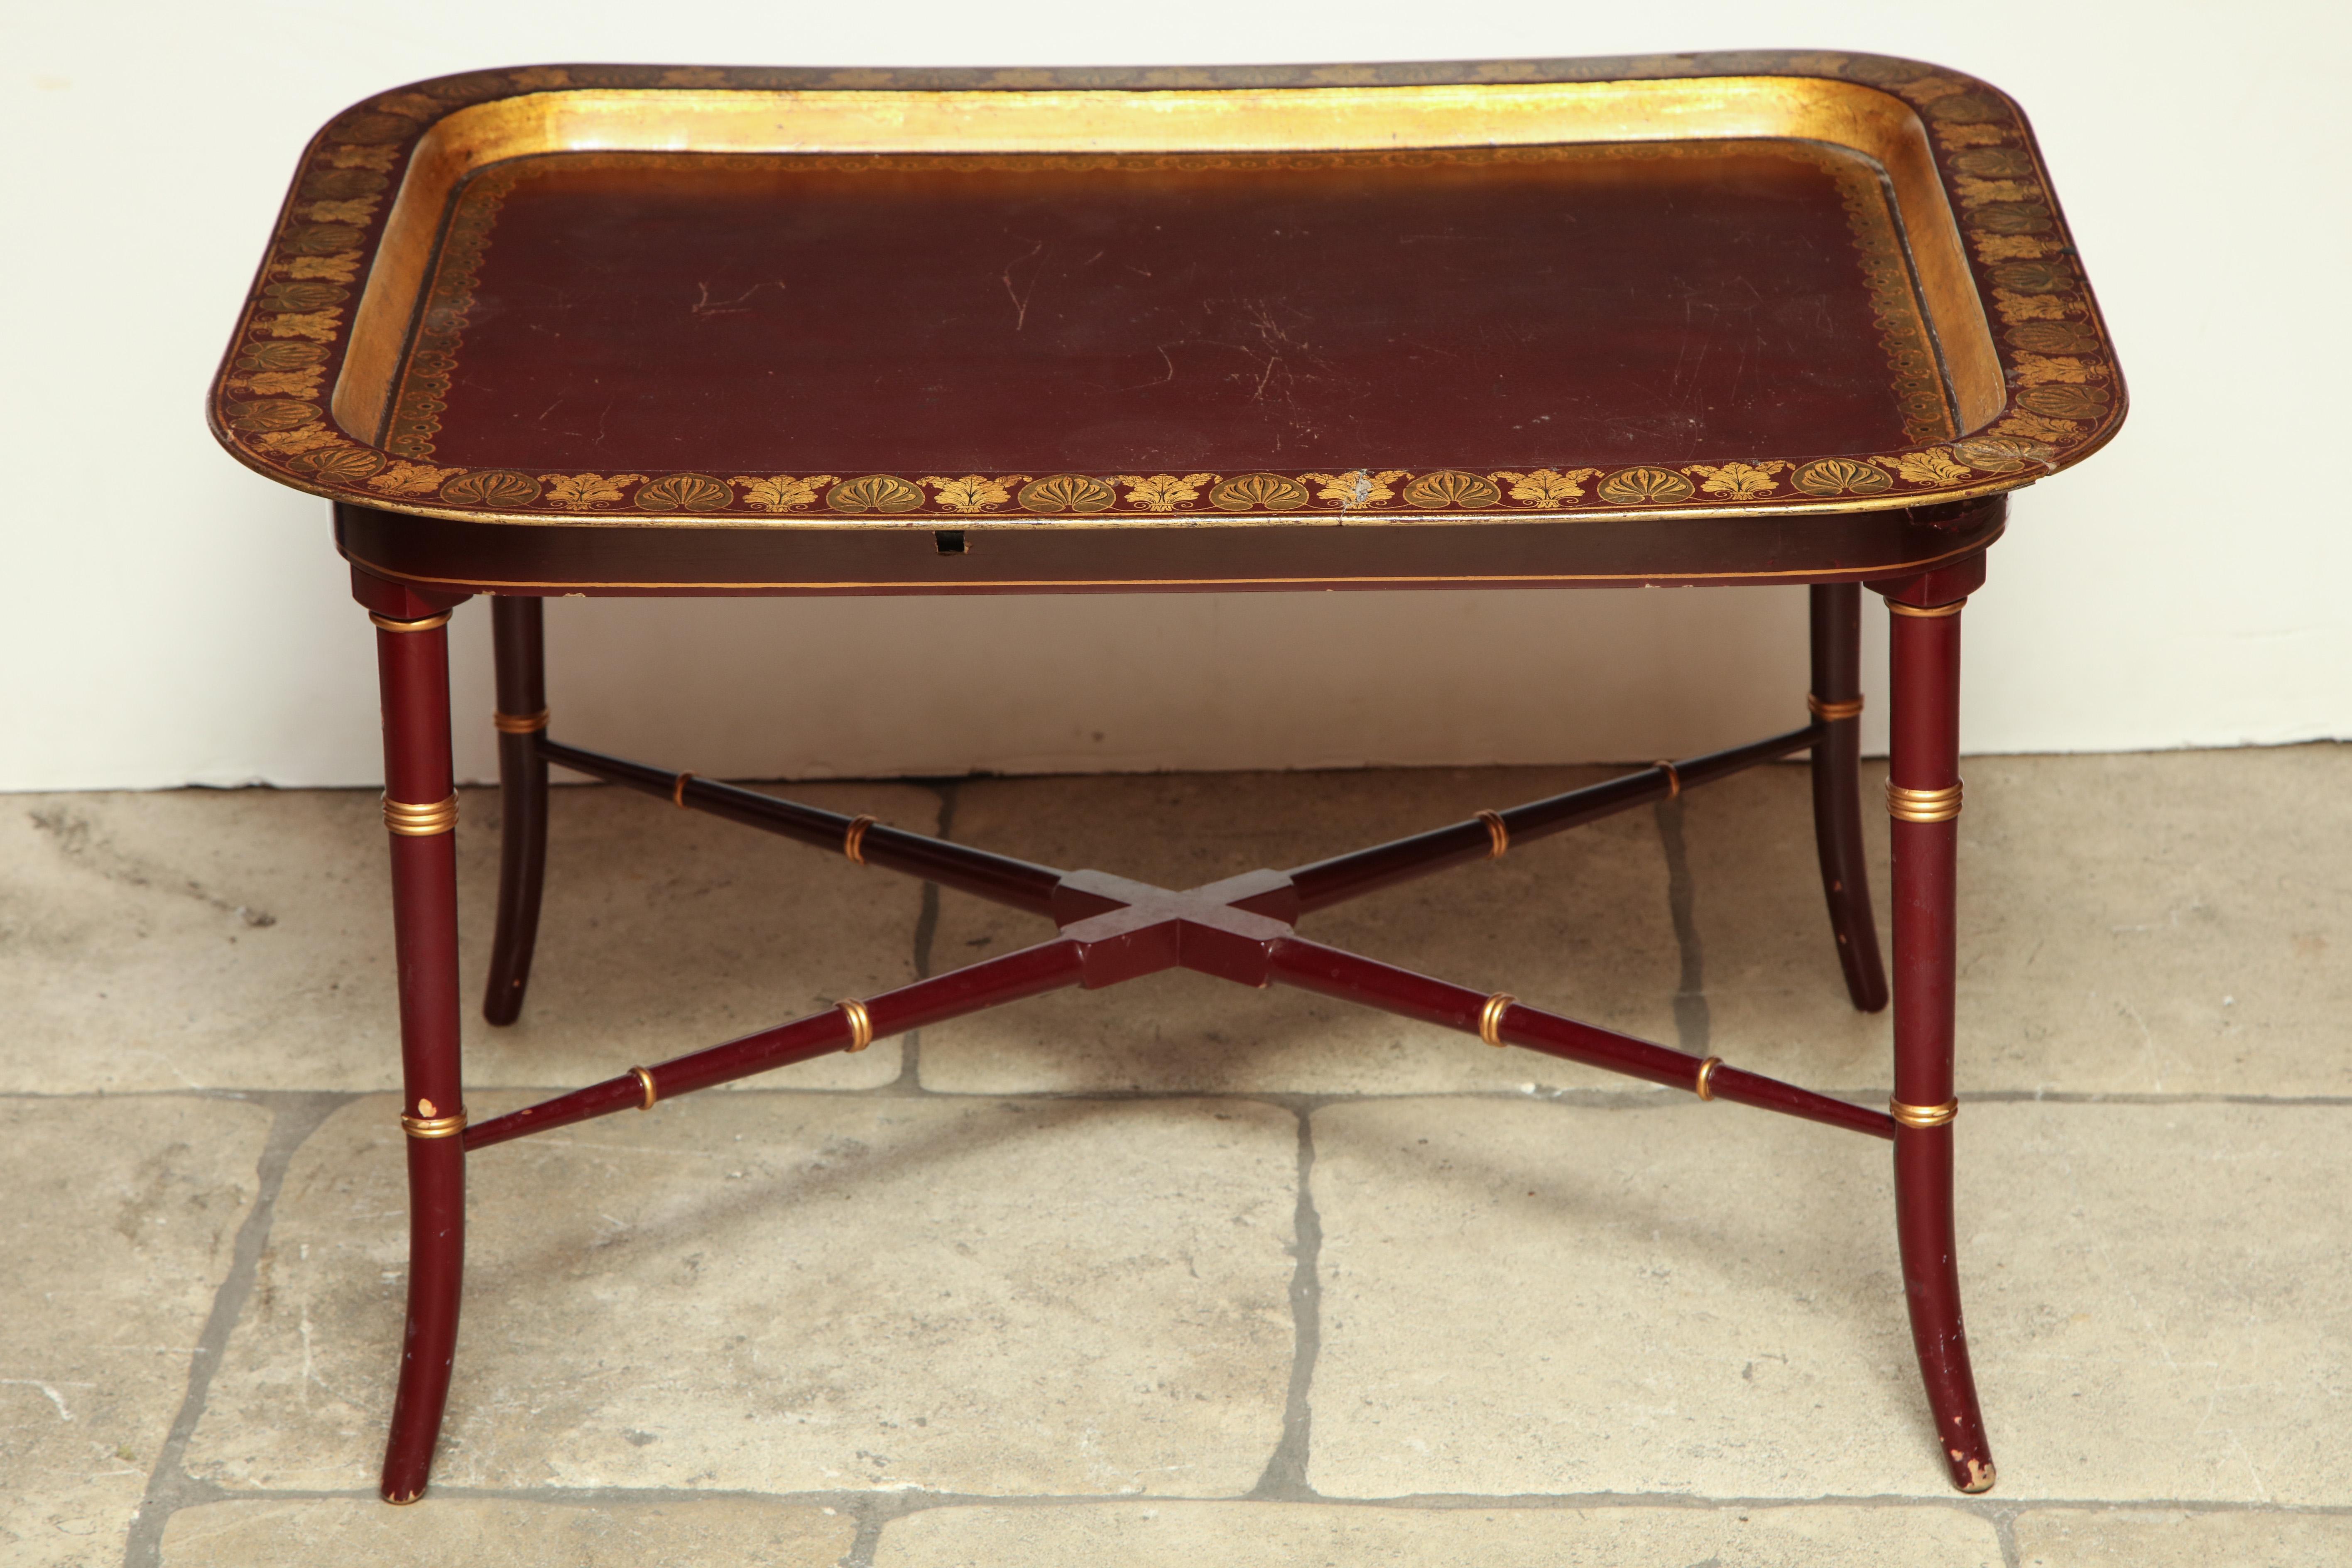 A fine English 19th century red lacquered and gilt stenciled rectangular tray on a red lacquered faux bamboo (later) base.